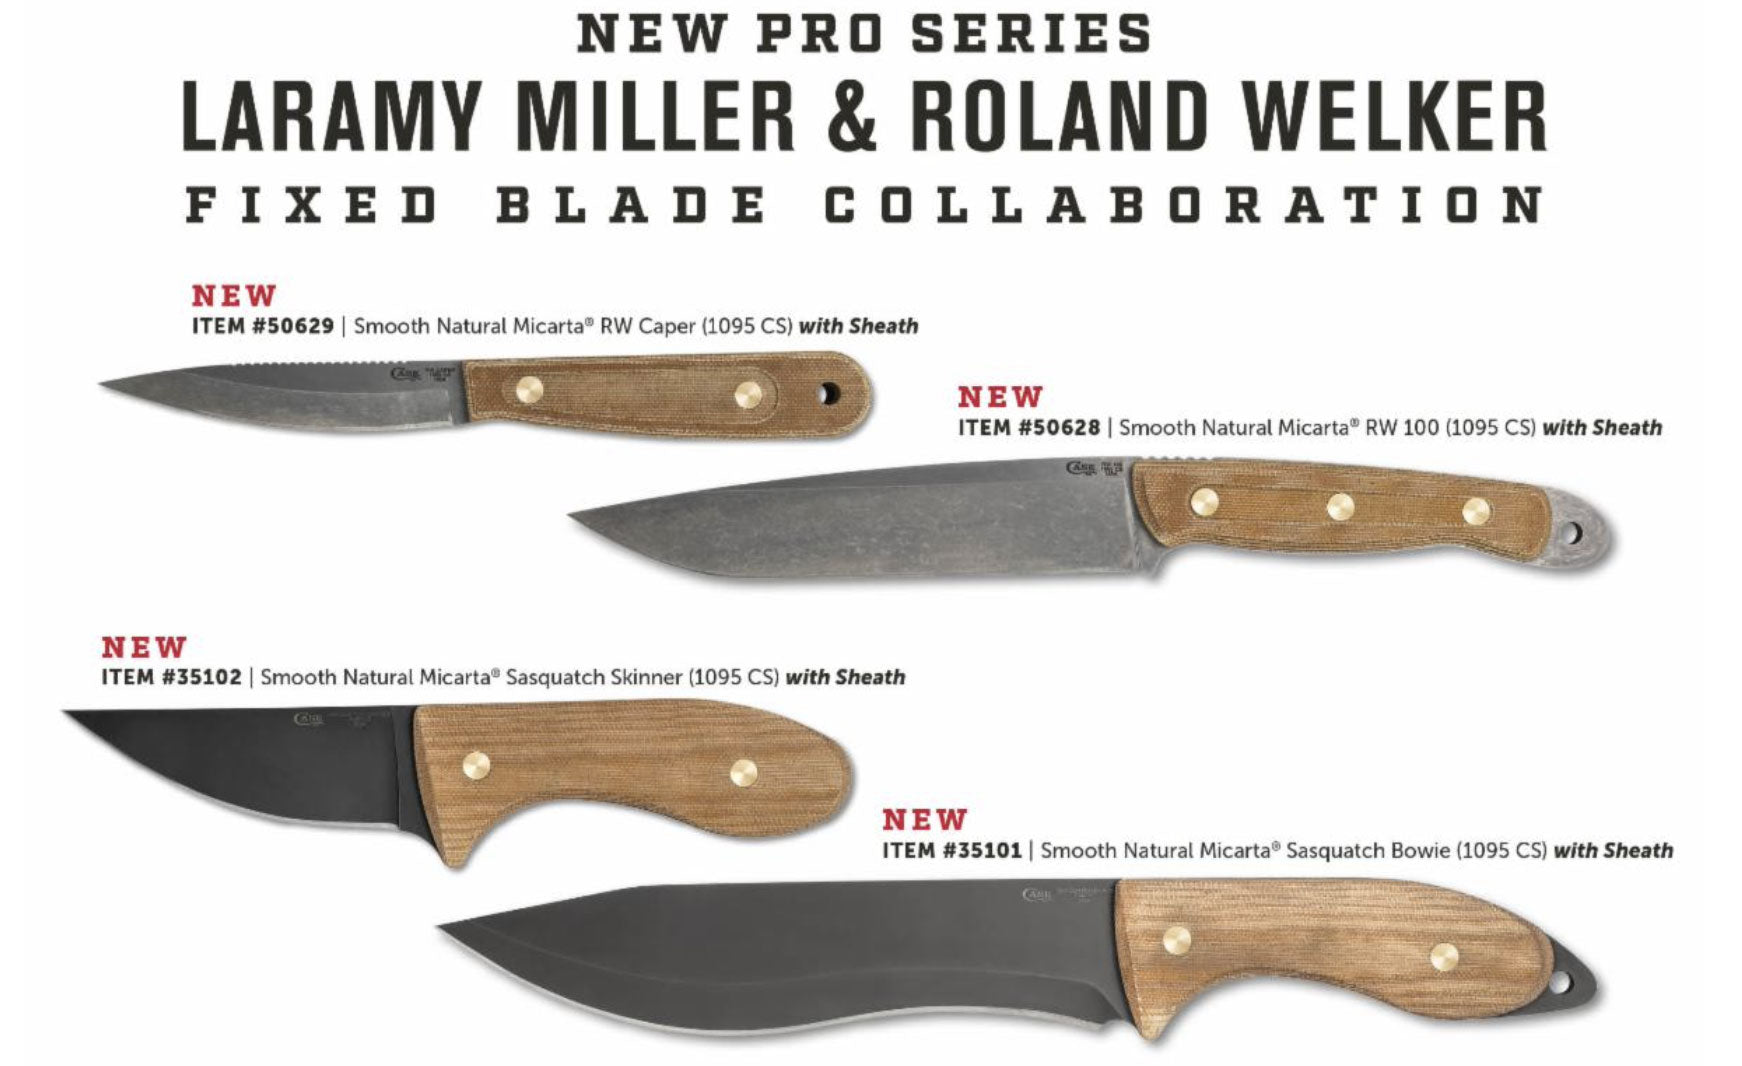 Laramy Miller and Roland Welker - Fixed Blade Collaboration